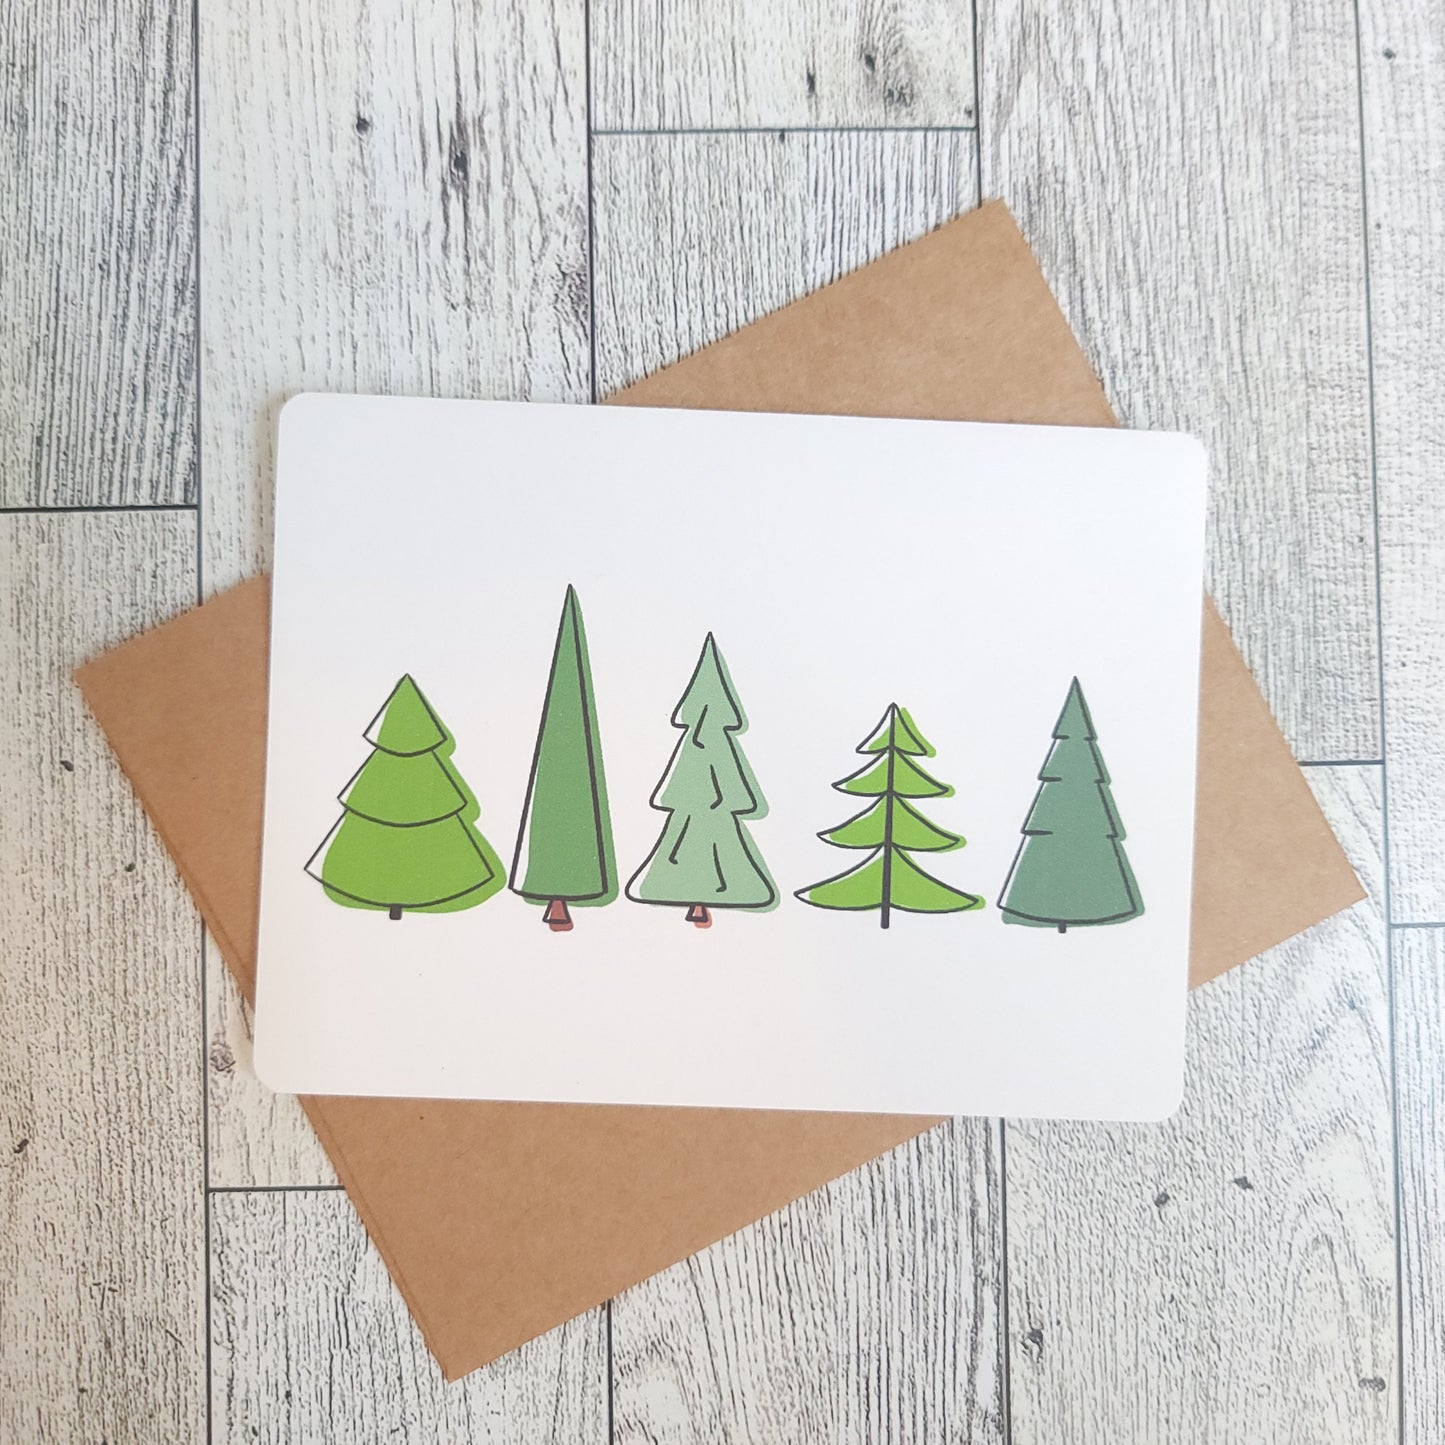 Pine Trees Handmade Greeting Card - Recycled Paper and Kraft Envelop - Overhead Shot